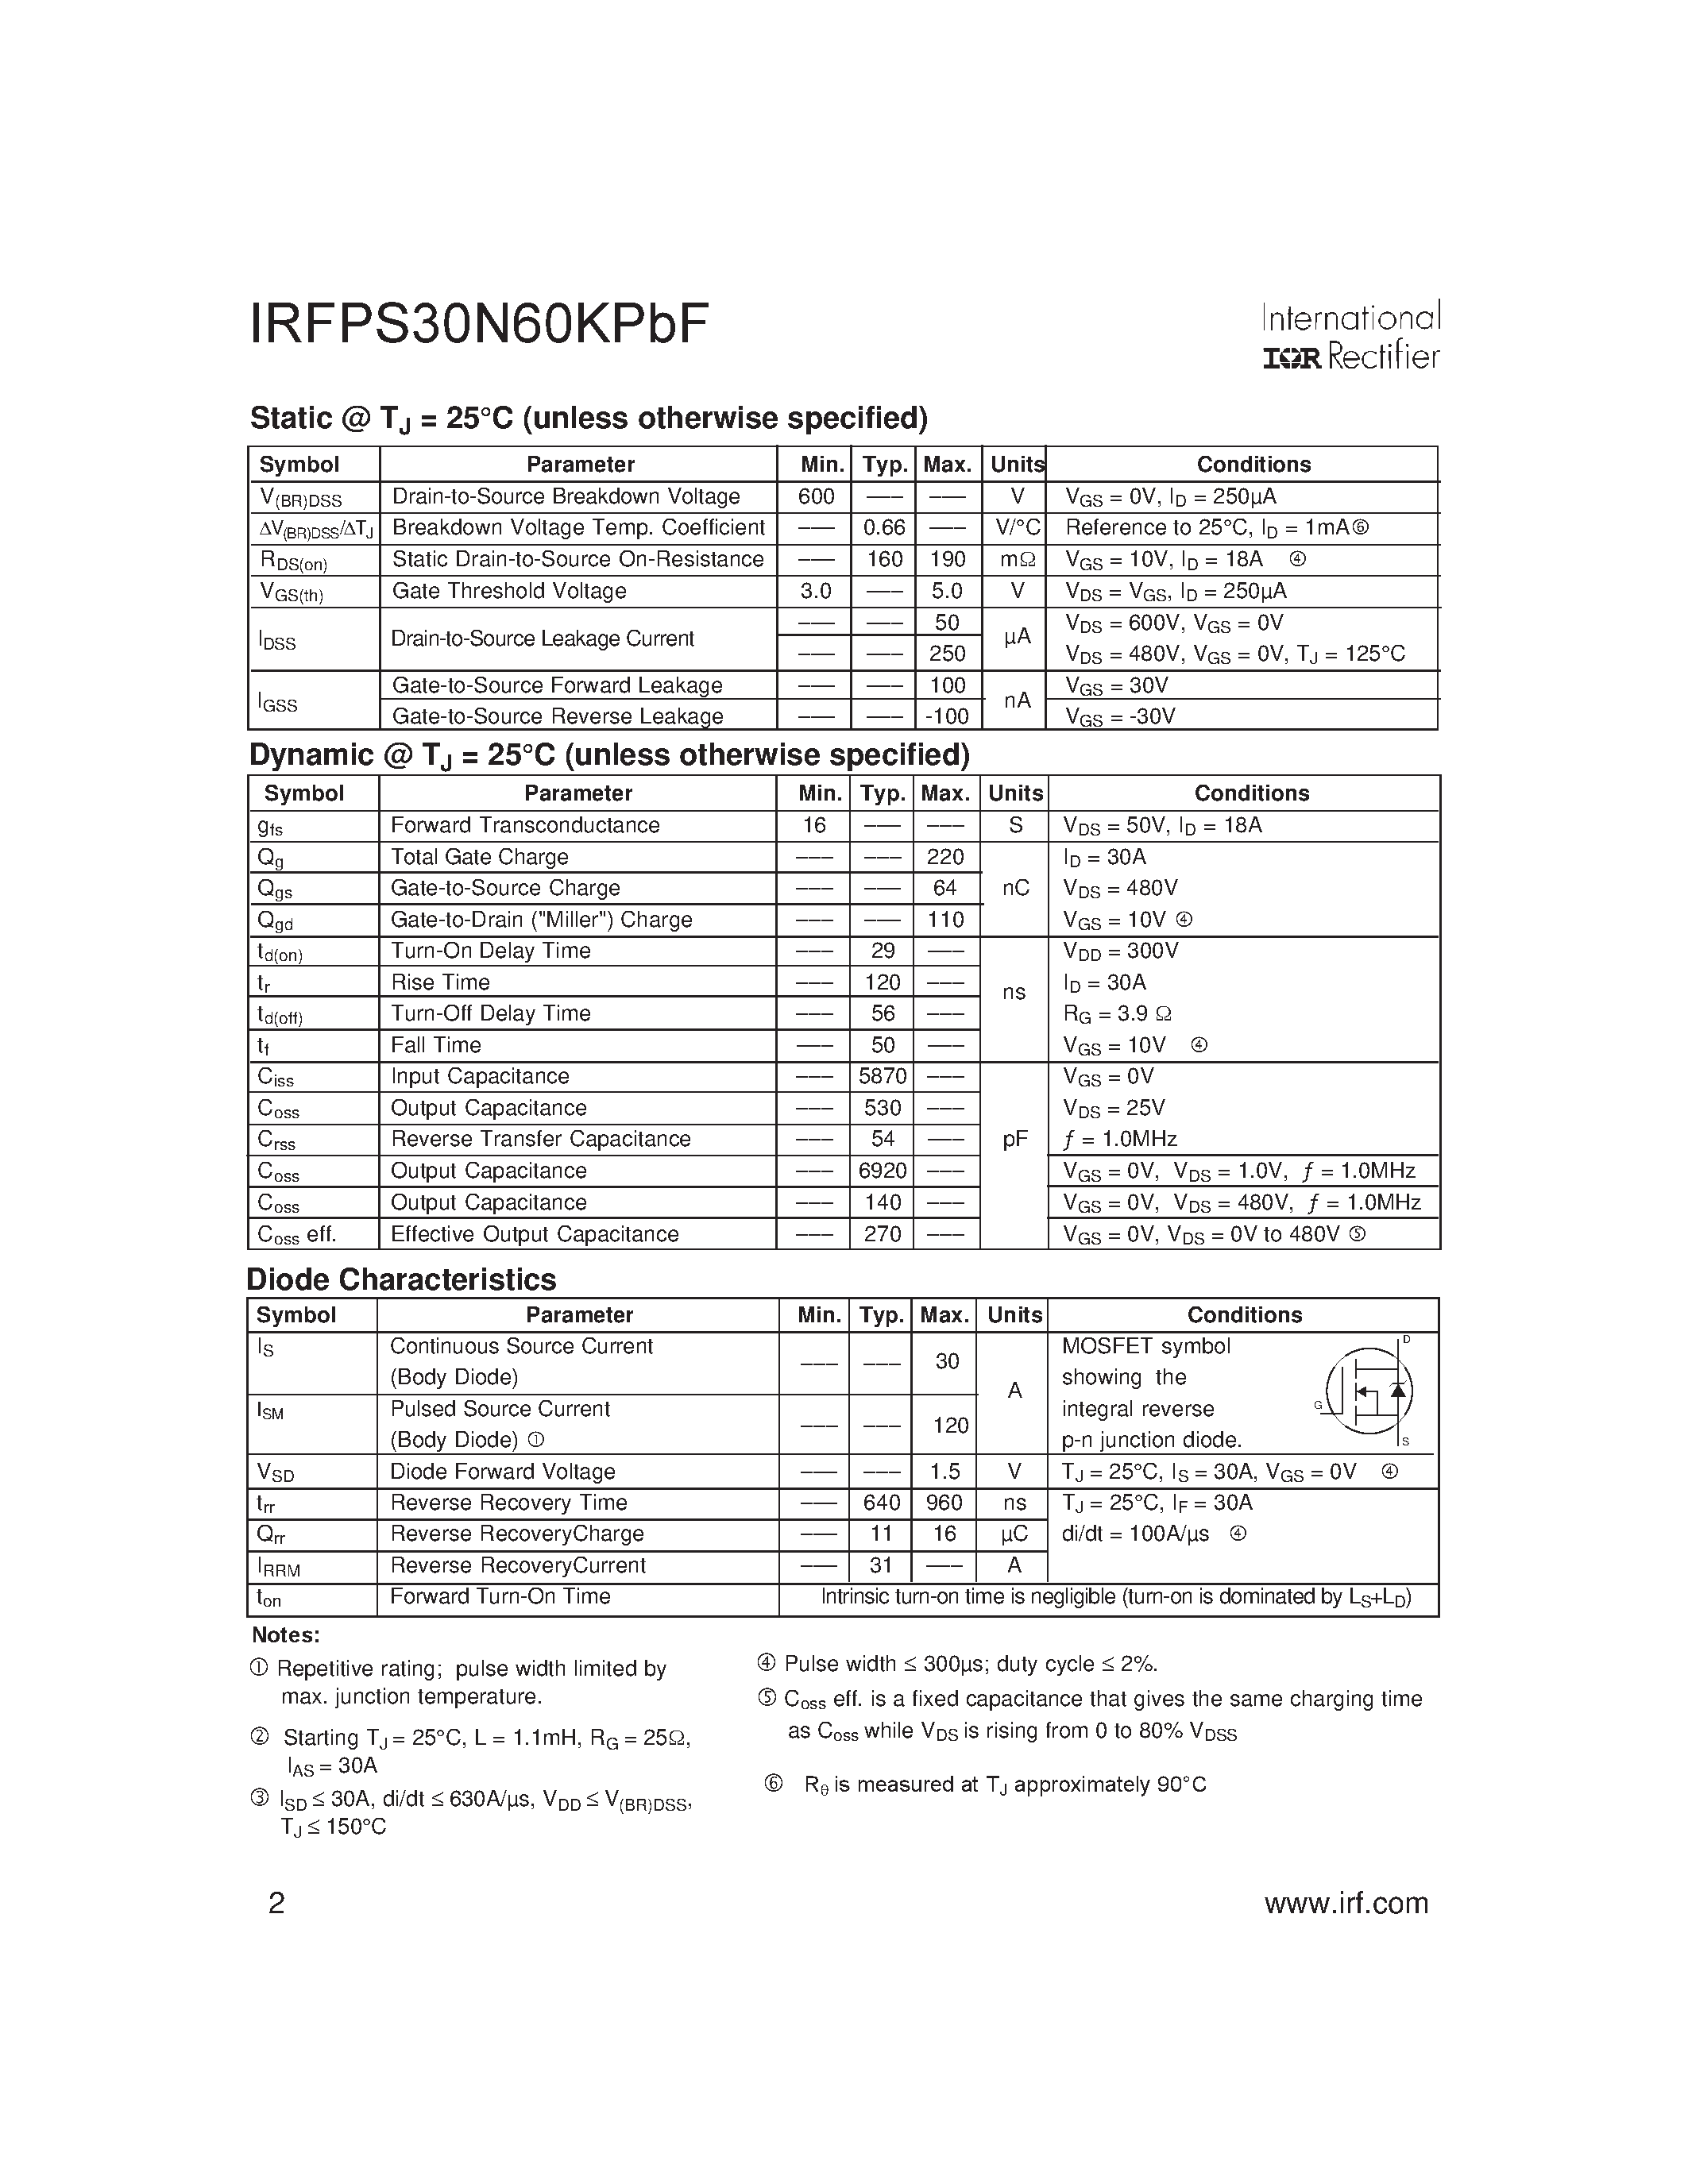 Datasheet IRFPS30N60KPBF - SMPS MOSFET page 2